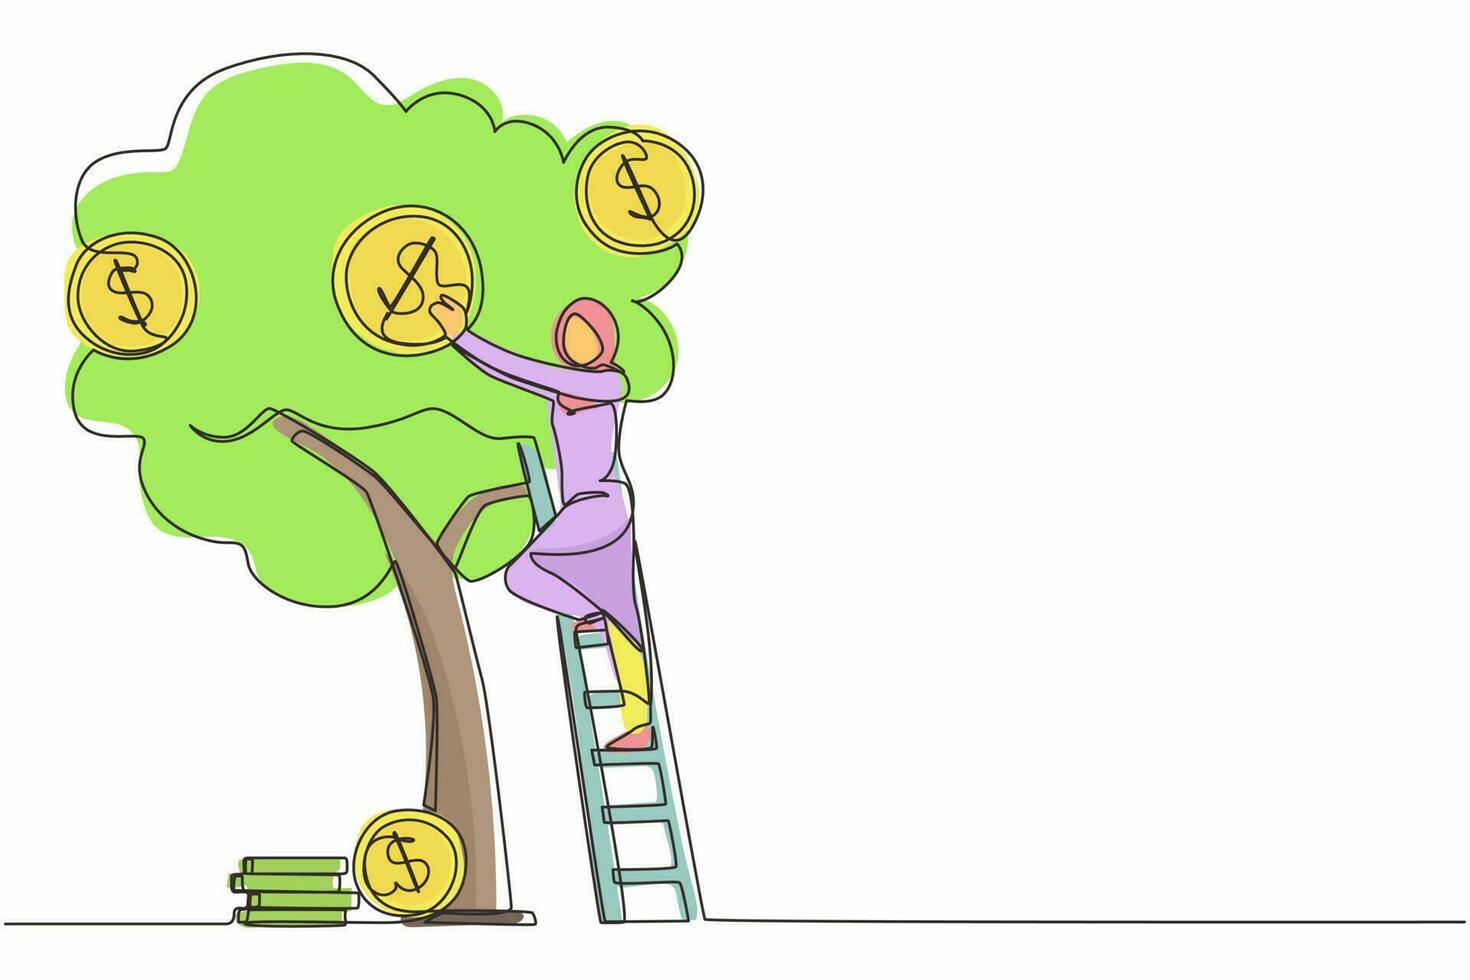 Single one line drawing Arabic businesswoman picking dollars from money tree. Money plant. Business growth, financial success concept. Investment, banking income. Continuous line design graphic vector